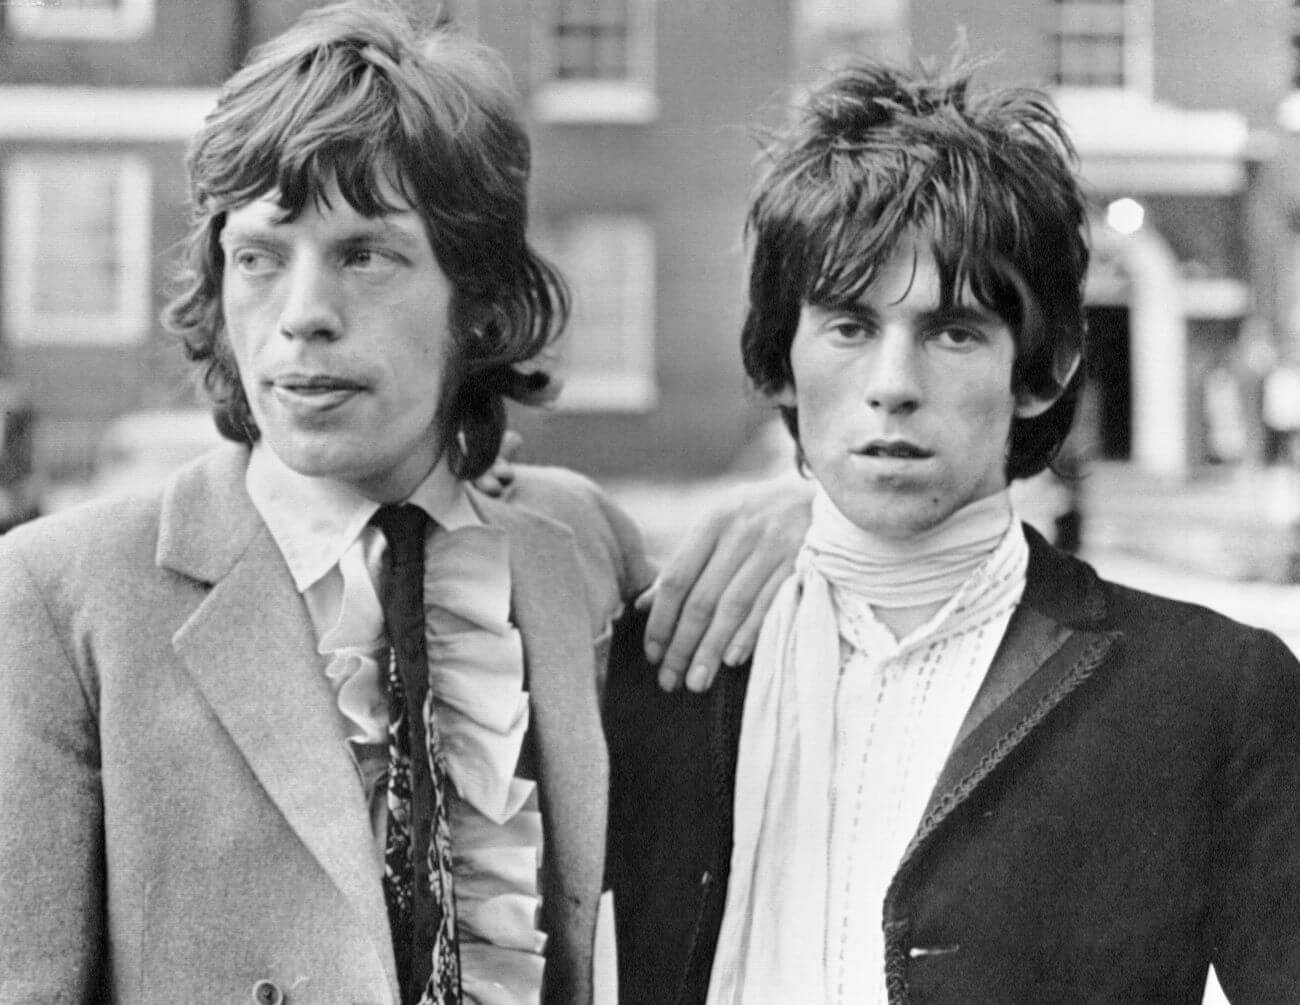 A black and white picture of Mick Jagger resting his arm on Keith Richard's shoulder.